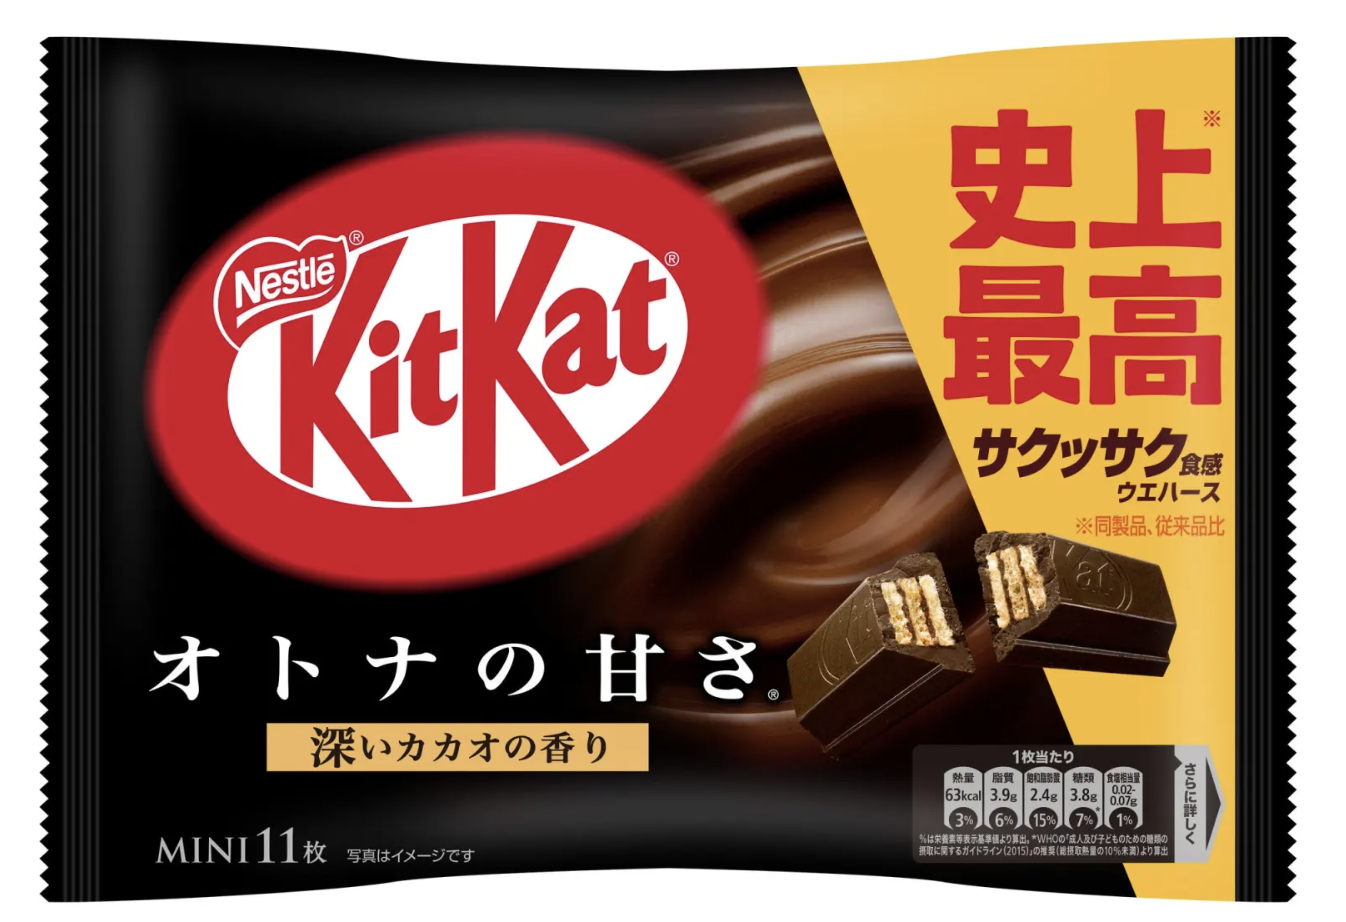 Nestlé to release ultimate perfected KitKat in honor of its 50th ...